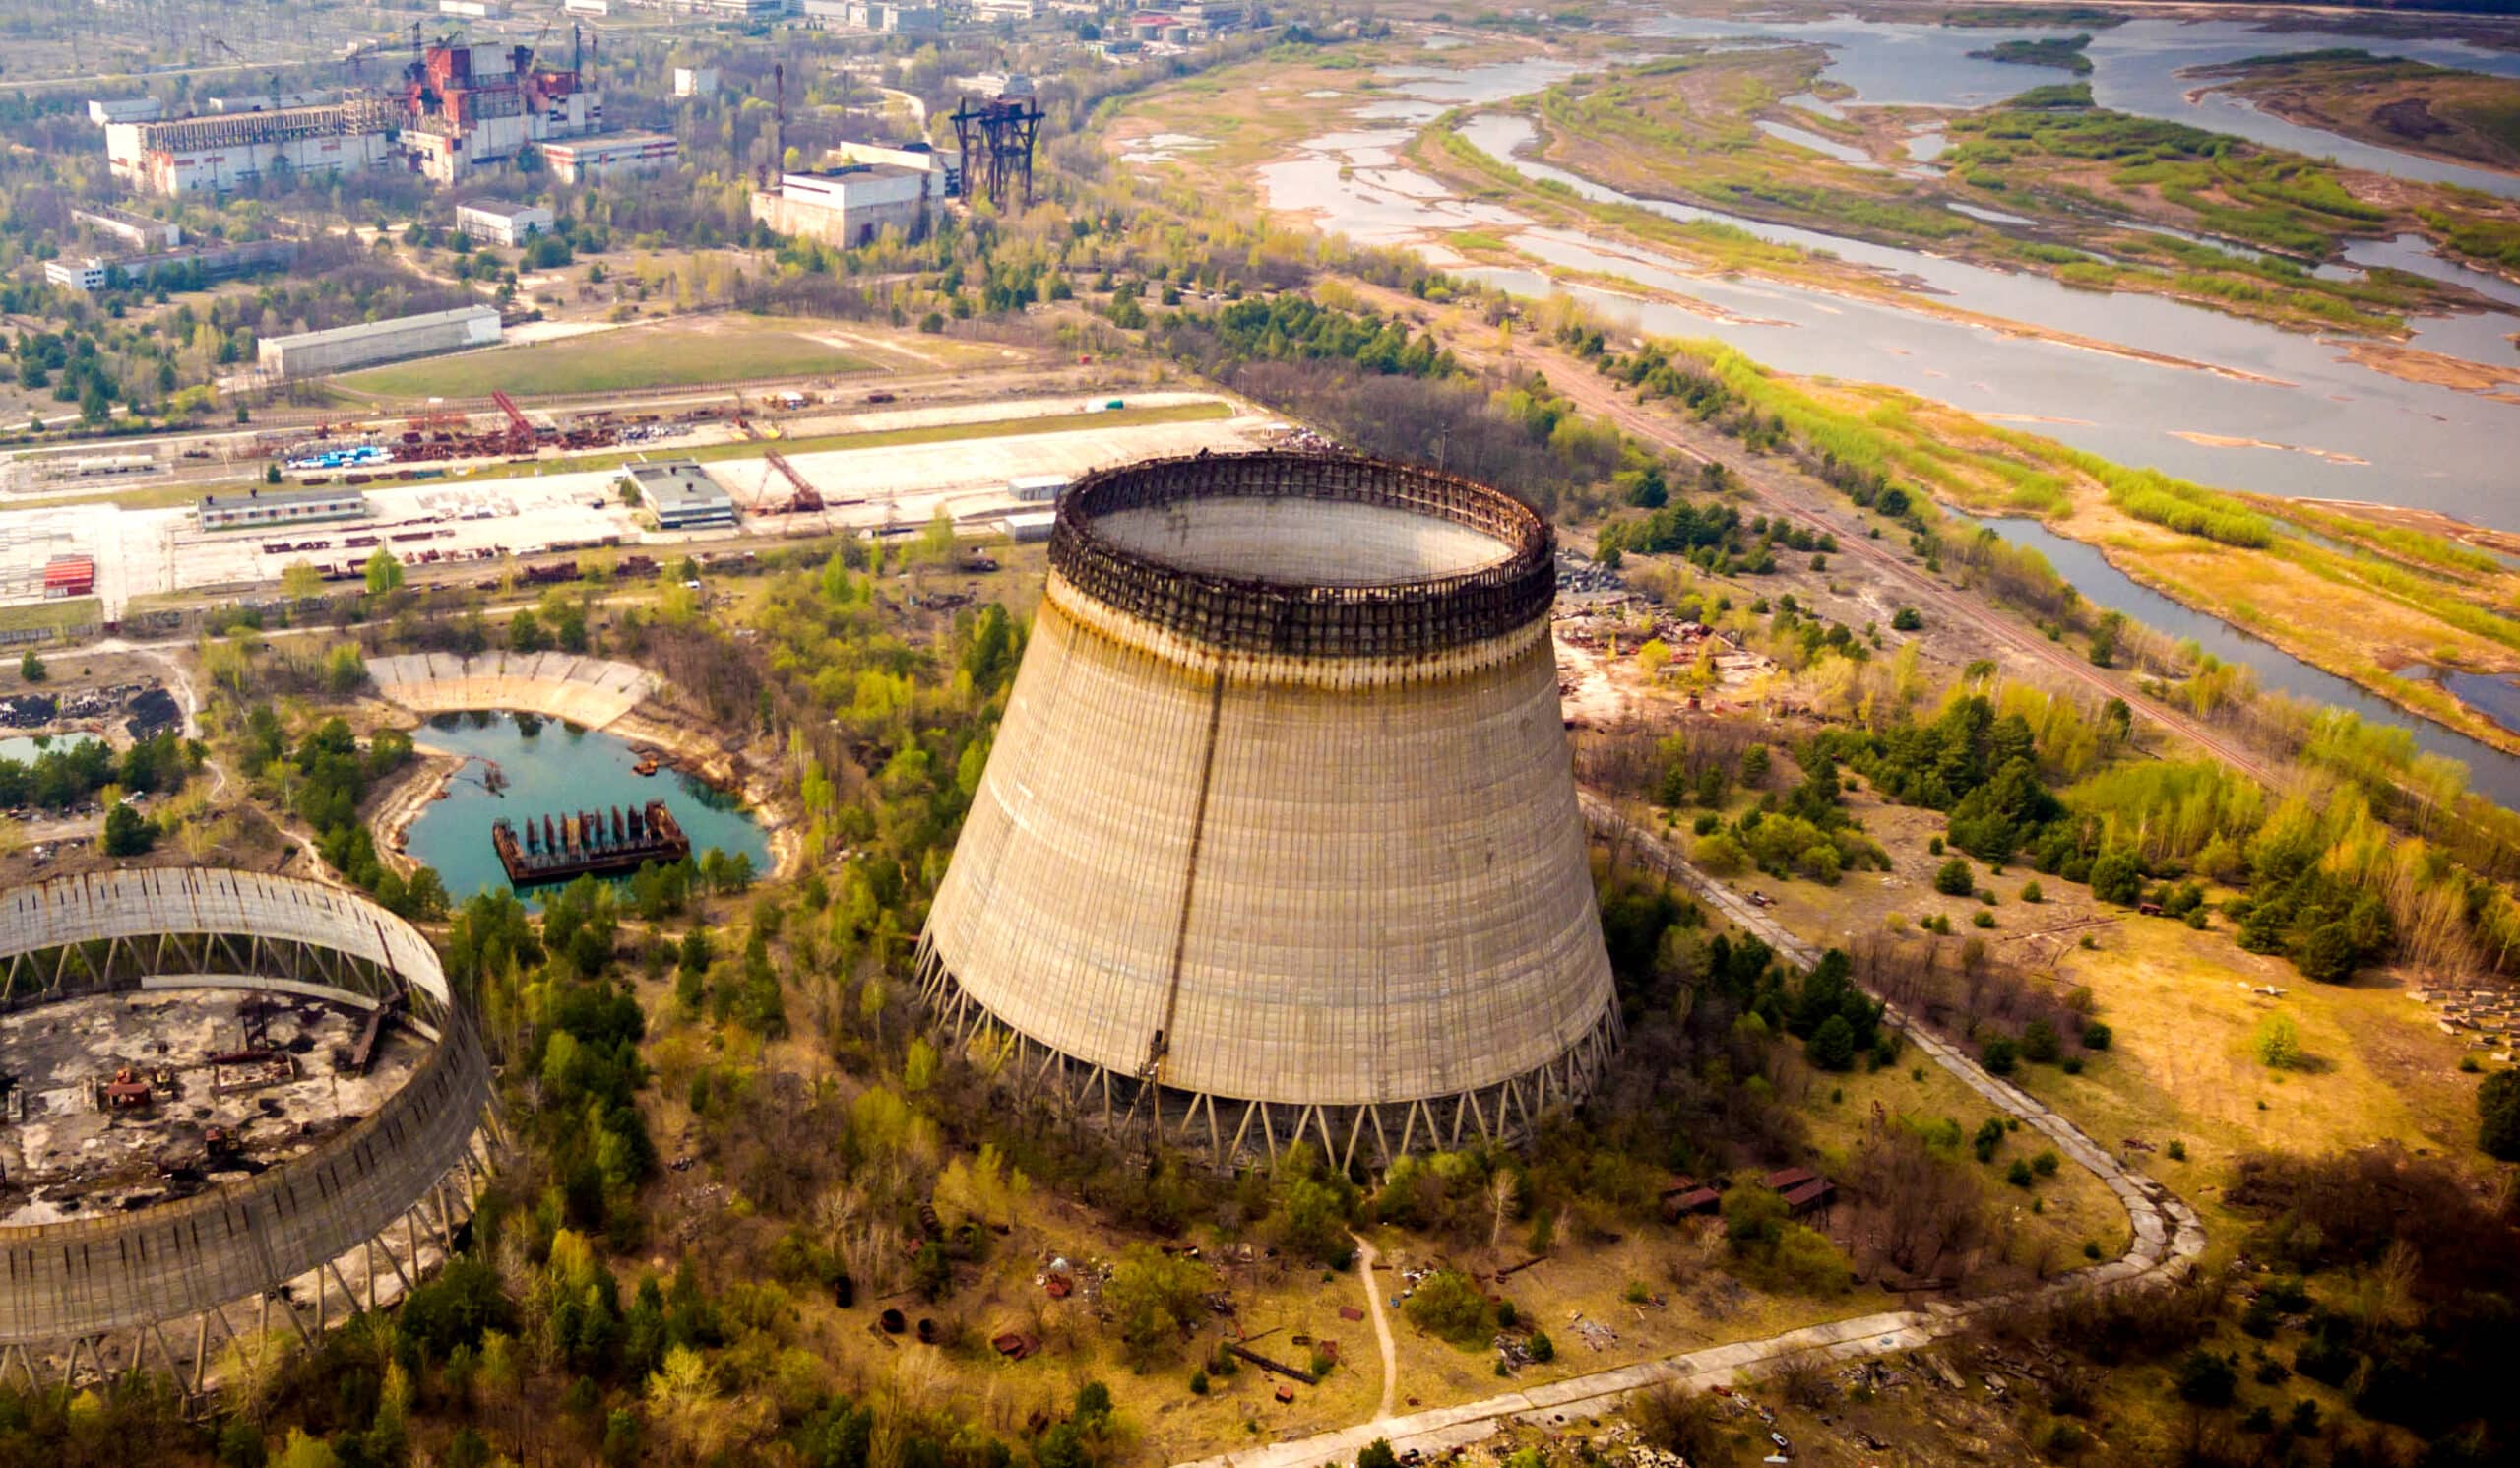 Chernobyl Nuclear Plant Reported To Have Lost Electricity. Here’s What That Means